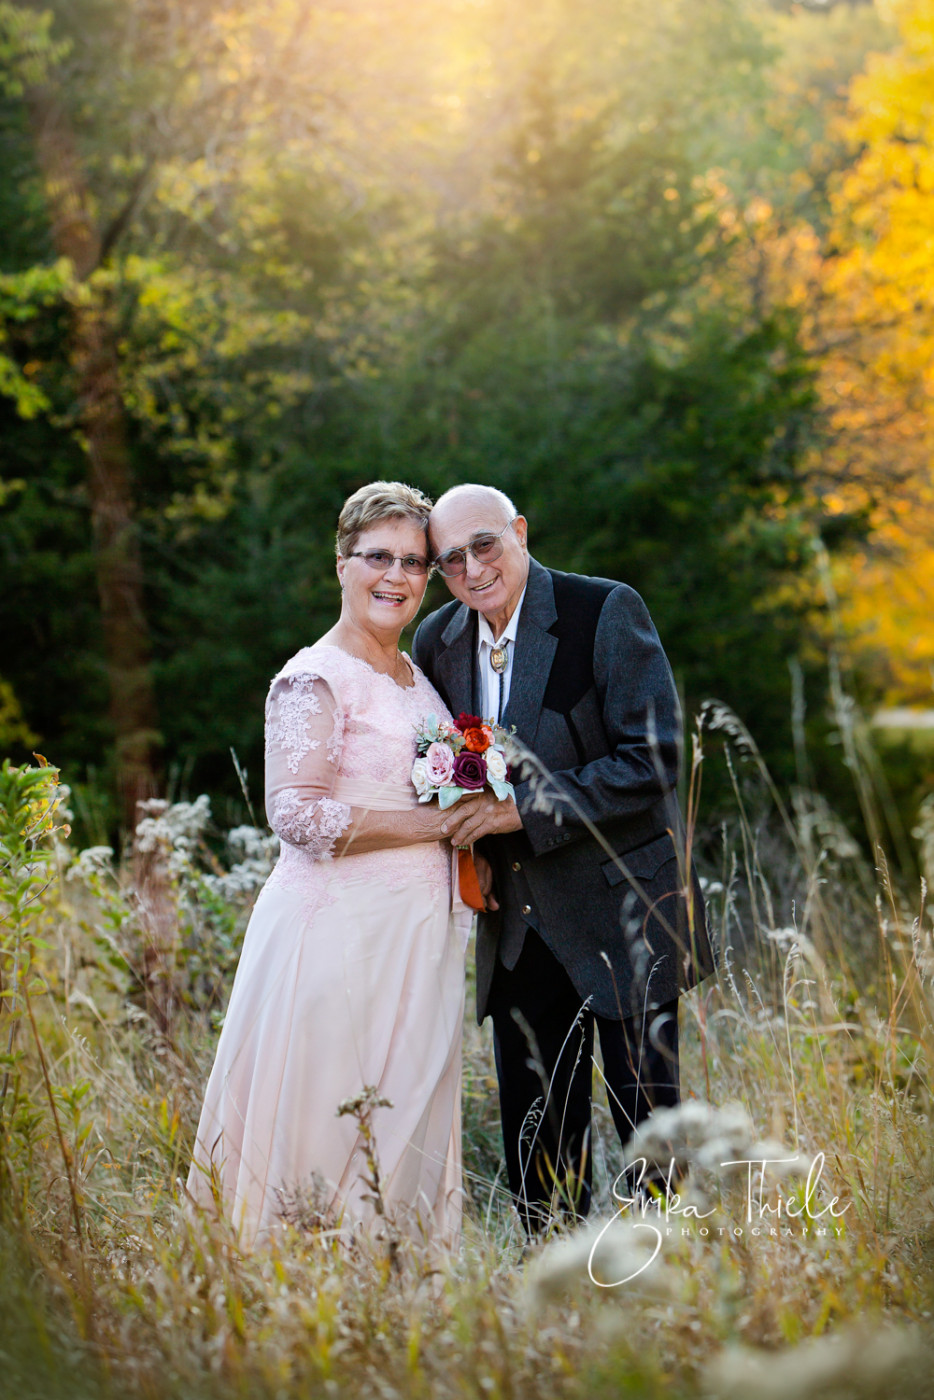 The Epley Family  |  A 50th Wedding Anniversary Session 